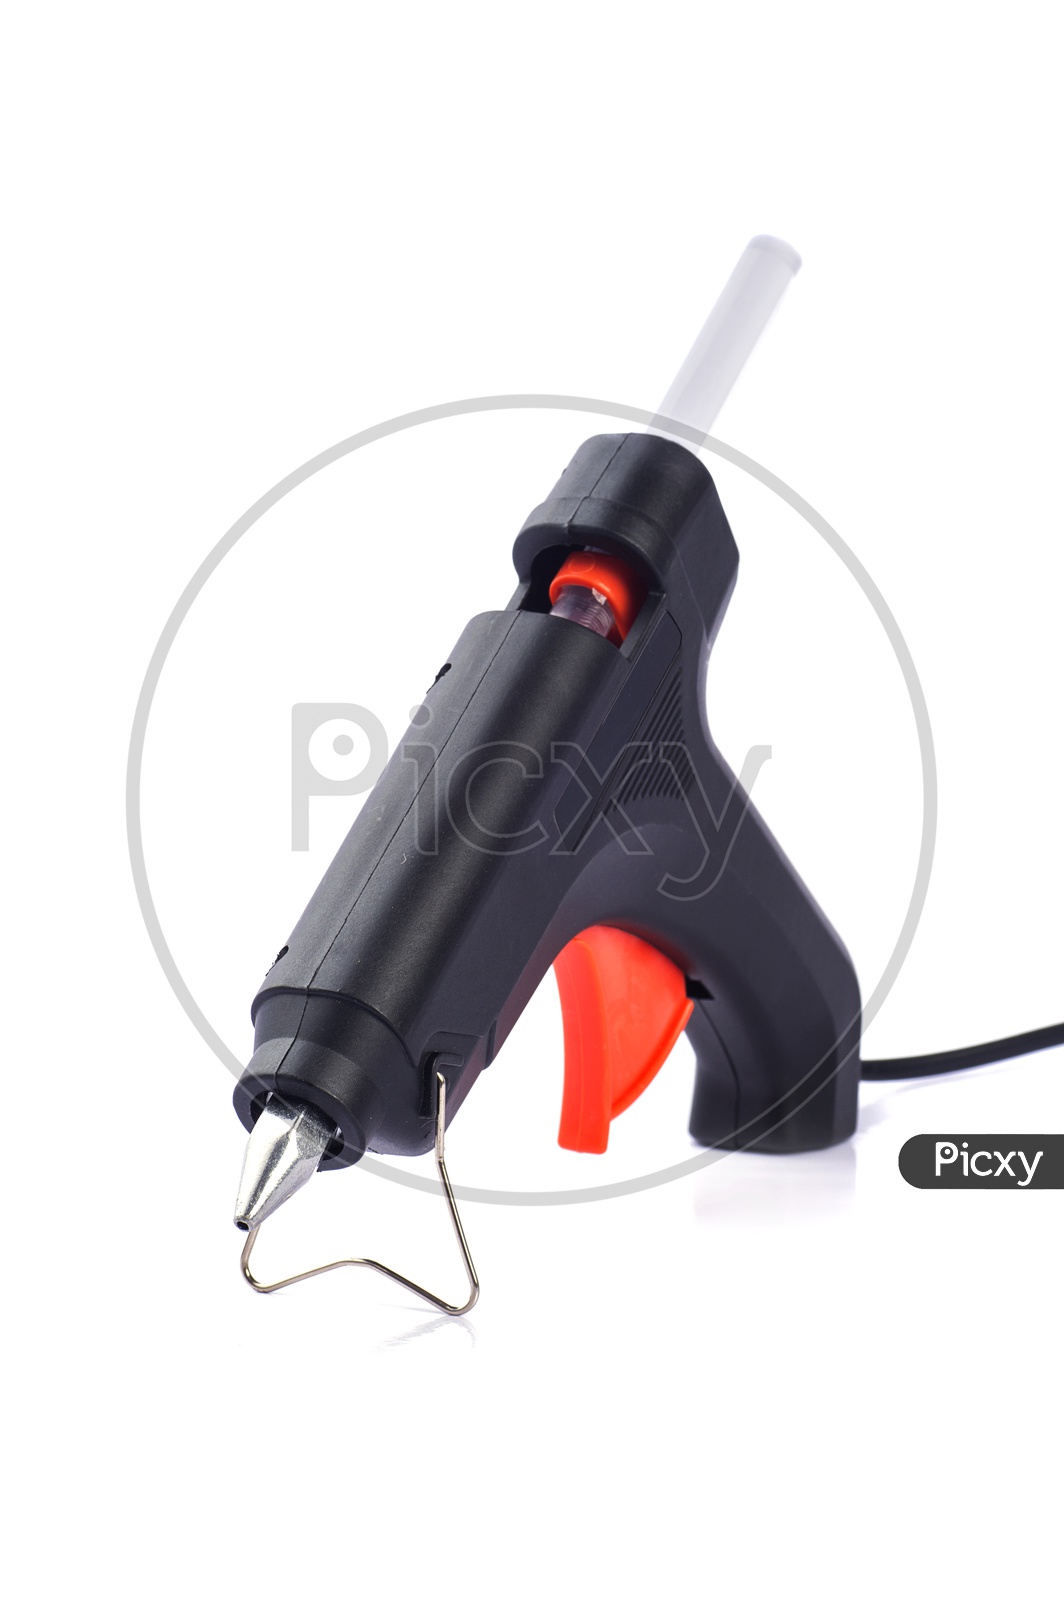 Hot Glue Gun On an Isolated White Background